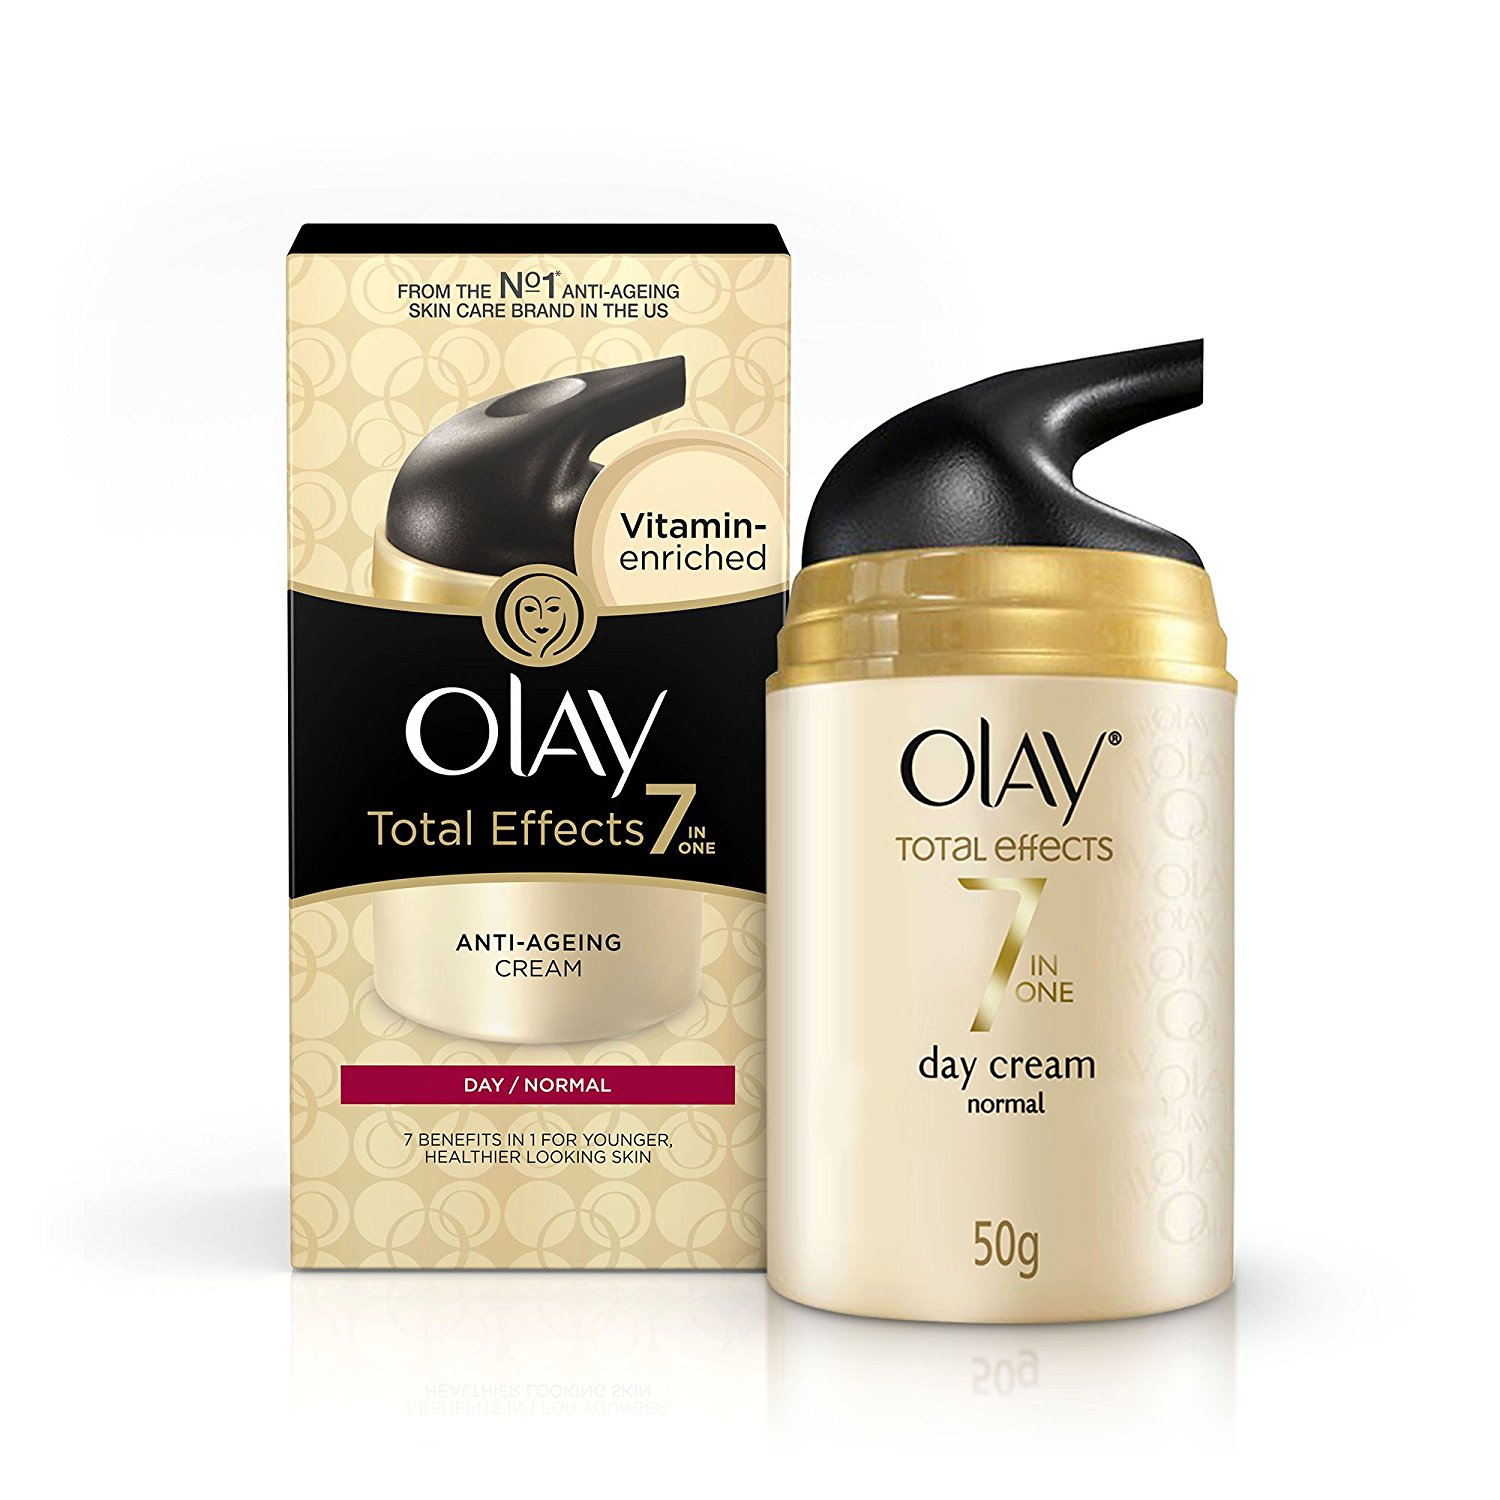 Olay Total Effects 7-in-1 Anti-Ageing Day Cream Normal, 50g